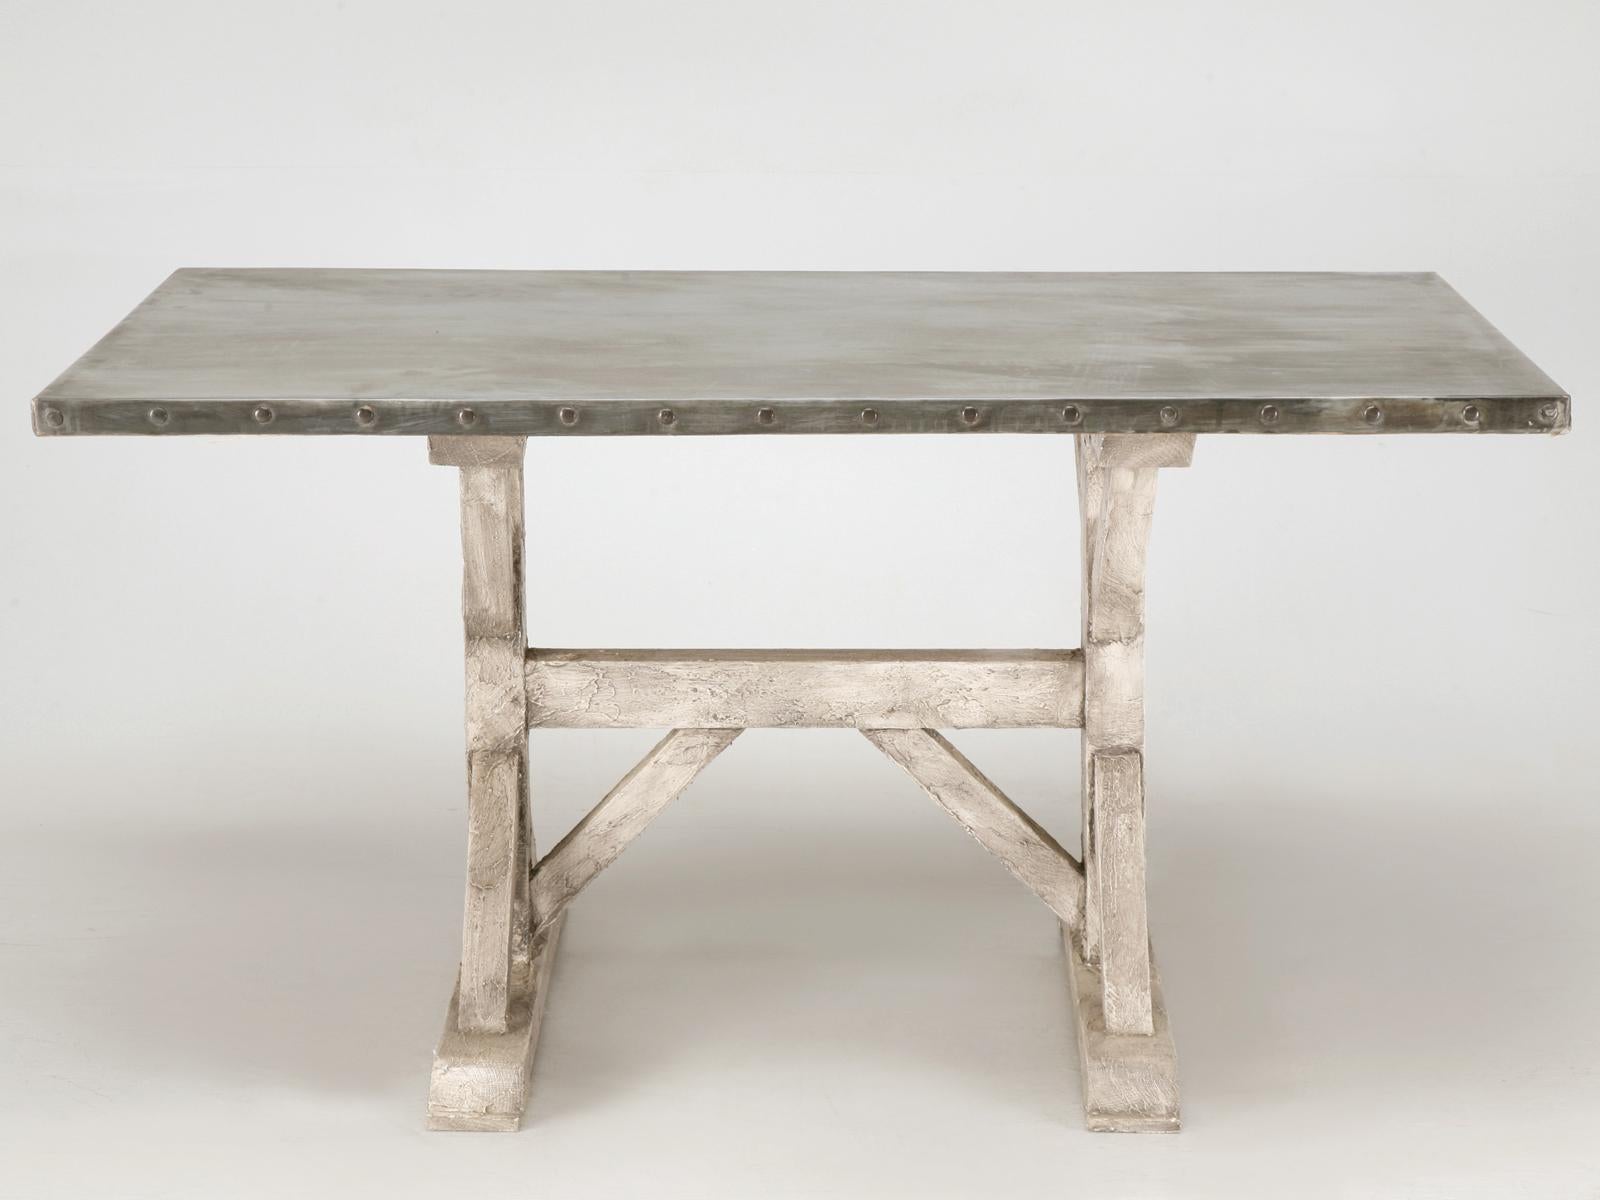 Newly constructed in our own workshop, is a handmade zinc top kitchen or dining table on trestle base with a distressed painted finish in any color or size. This kitchen or dining room zinc table is strong extremely stable and ideal for casual